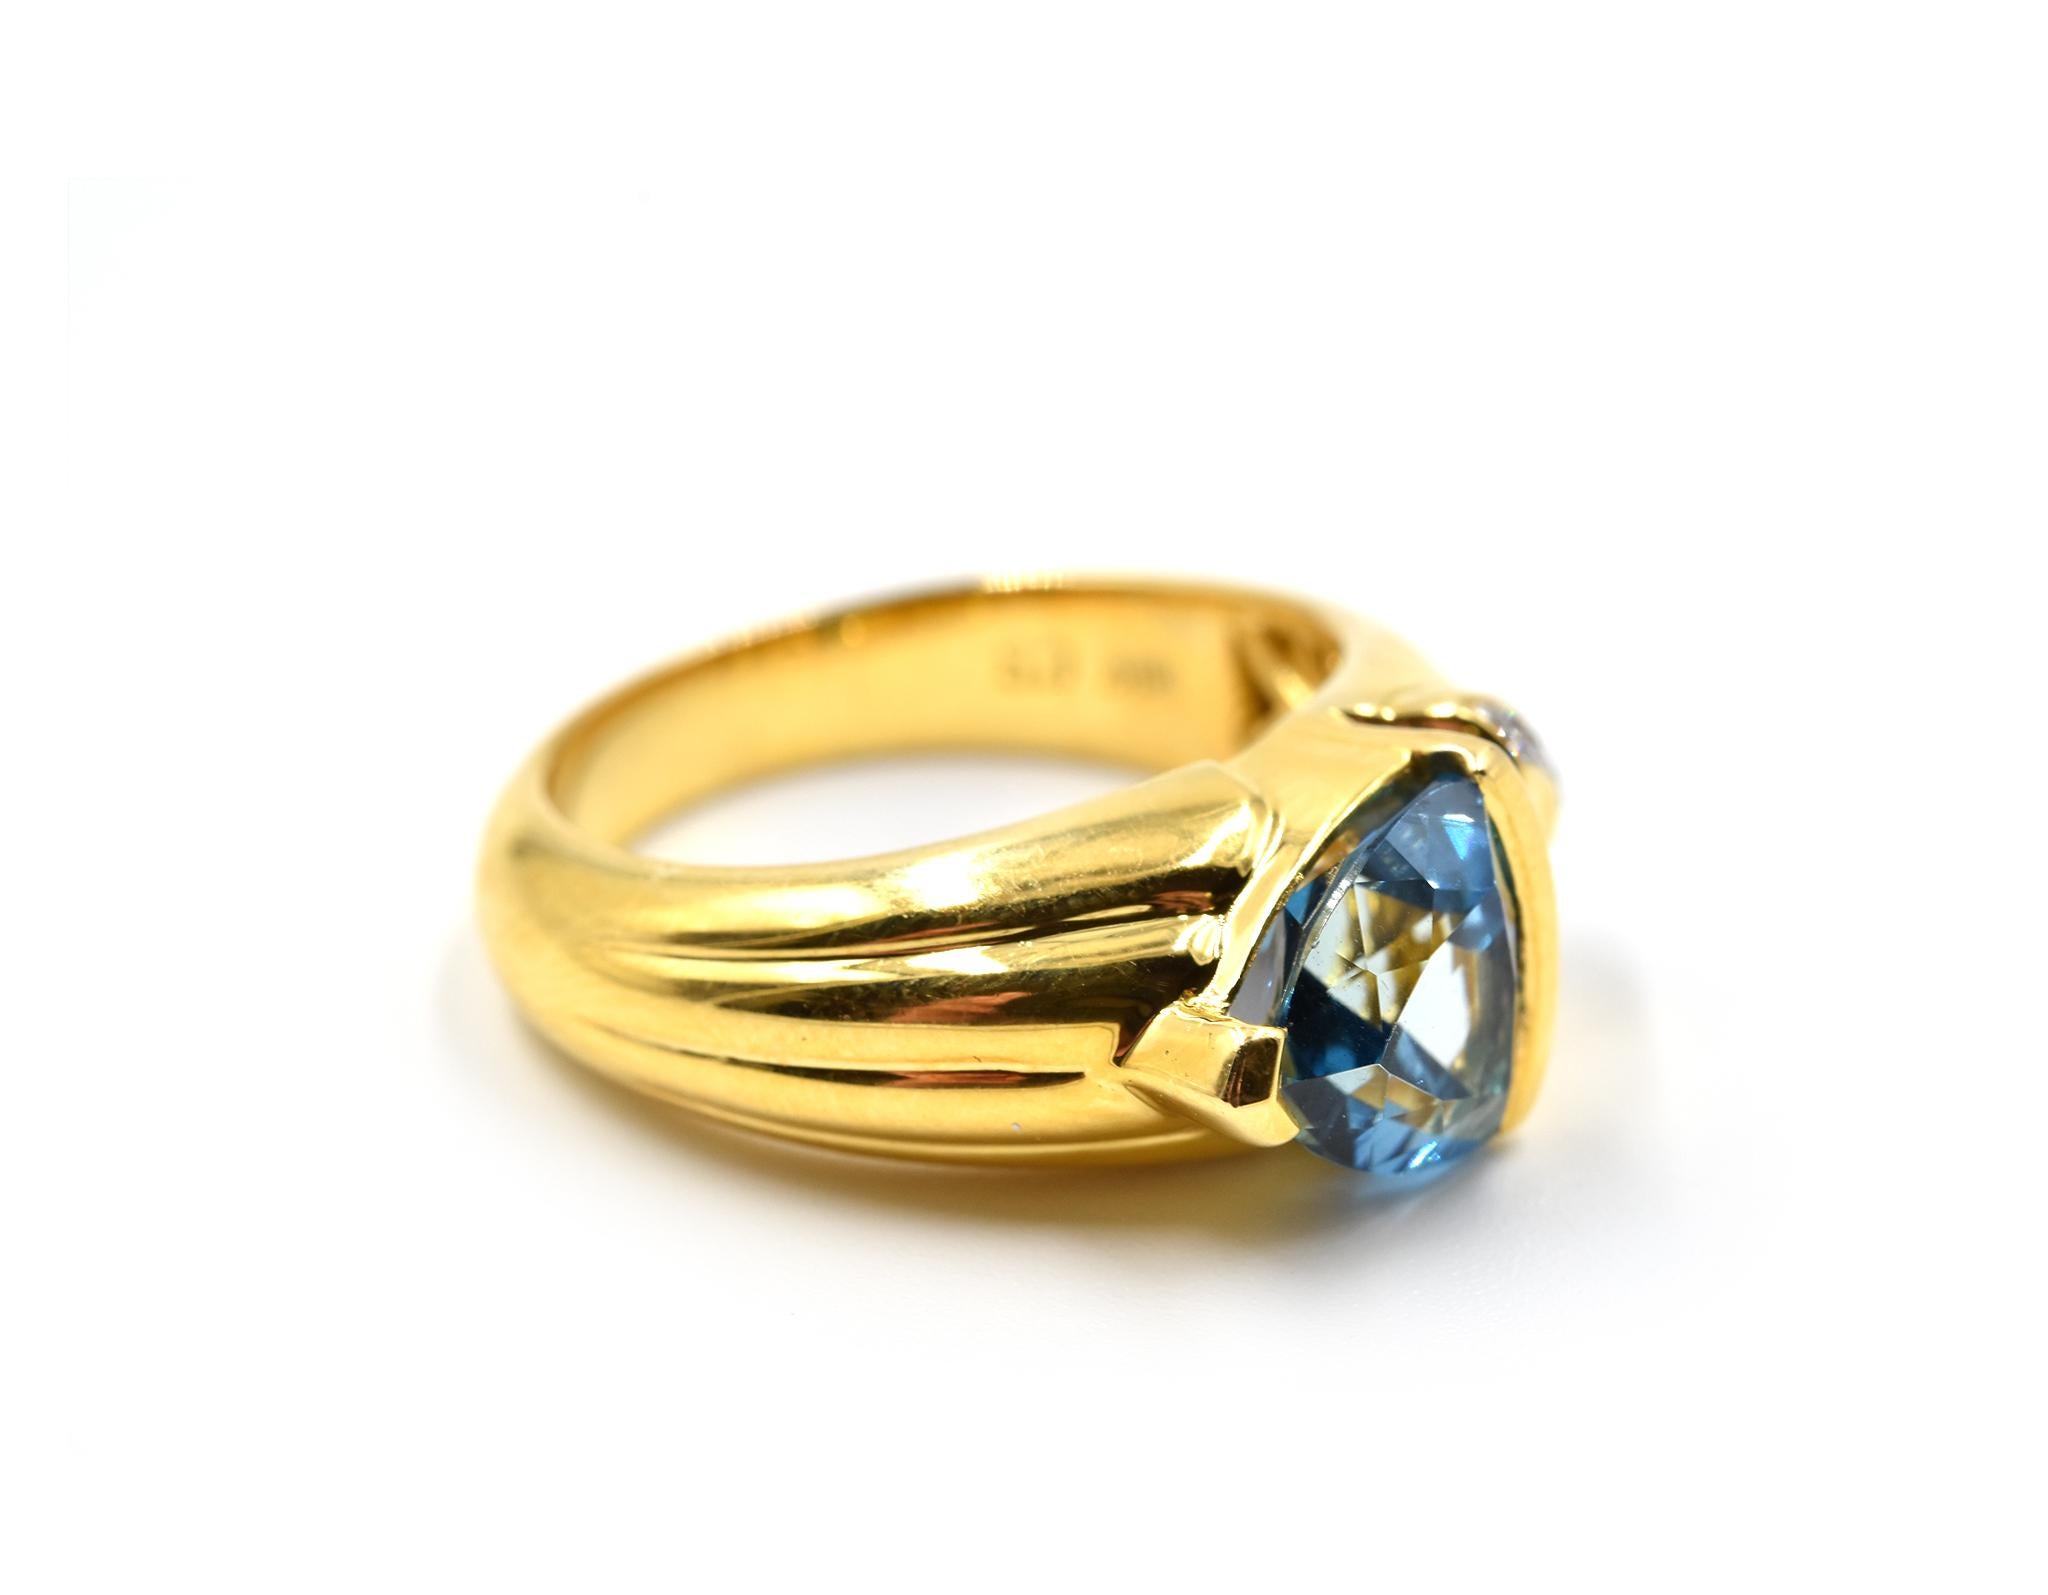 1.60 Carat Blue Topaz and Diamond Ring 18 Karat Yellow Gold In Excellent Condition For Sale In Scottsdale, AZ